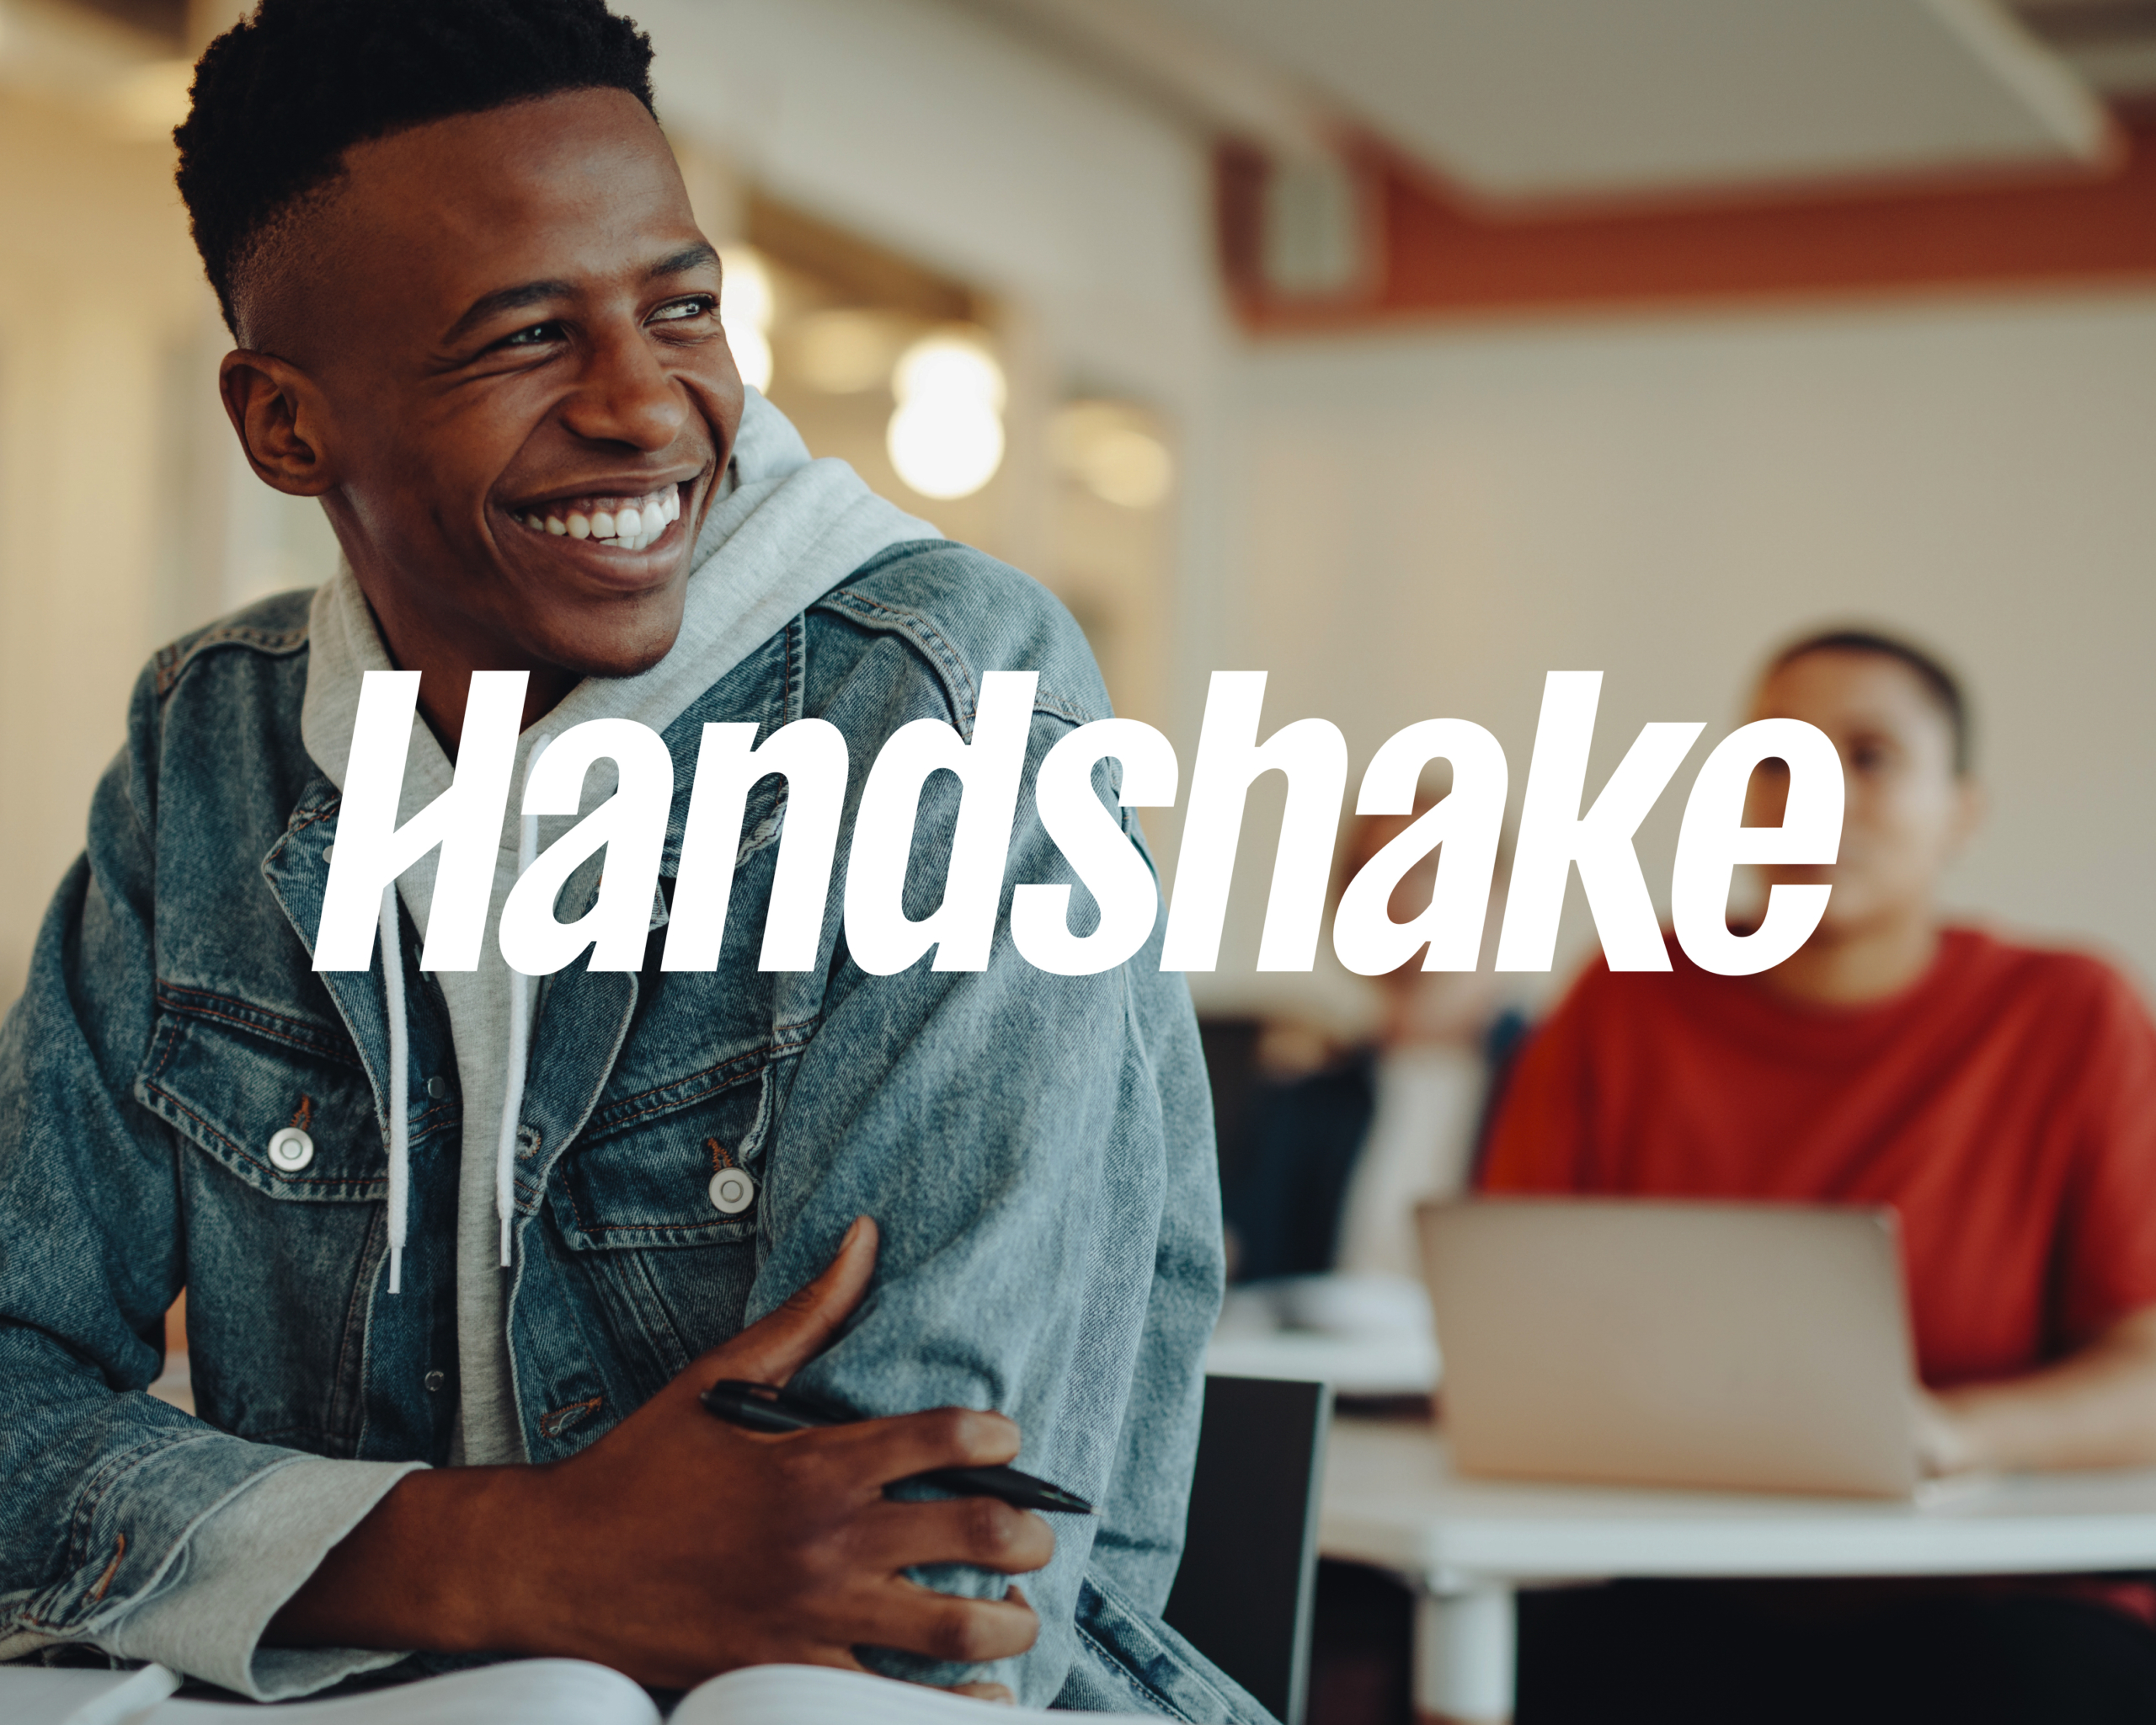 Photo of students in a classroom, with the Handshake logo in the foreground